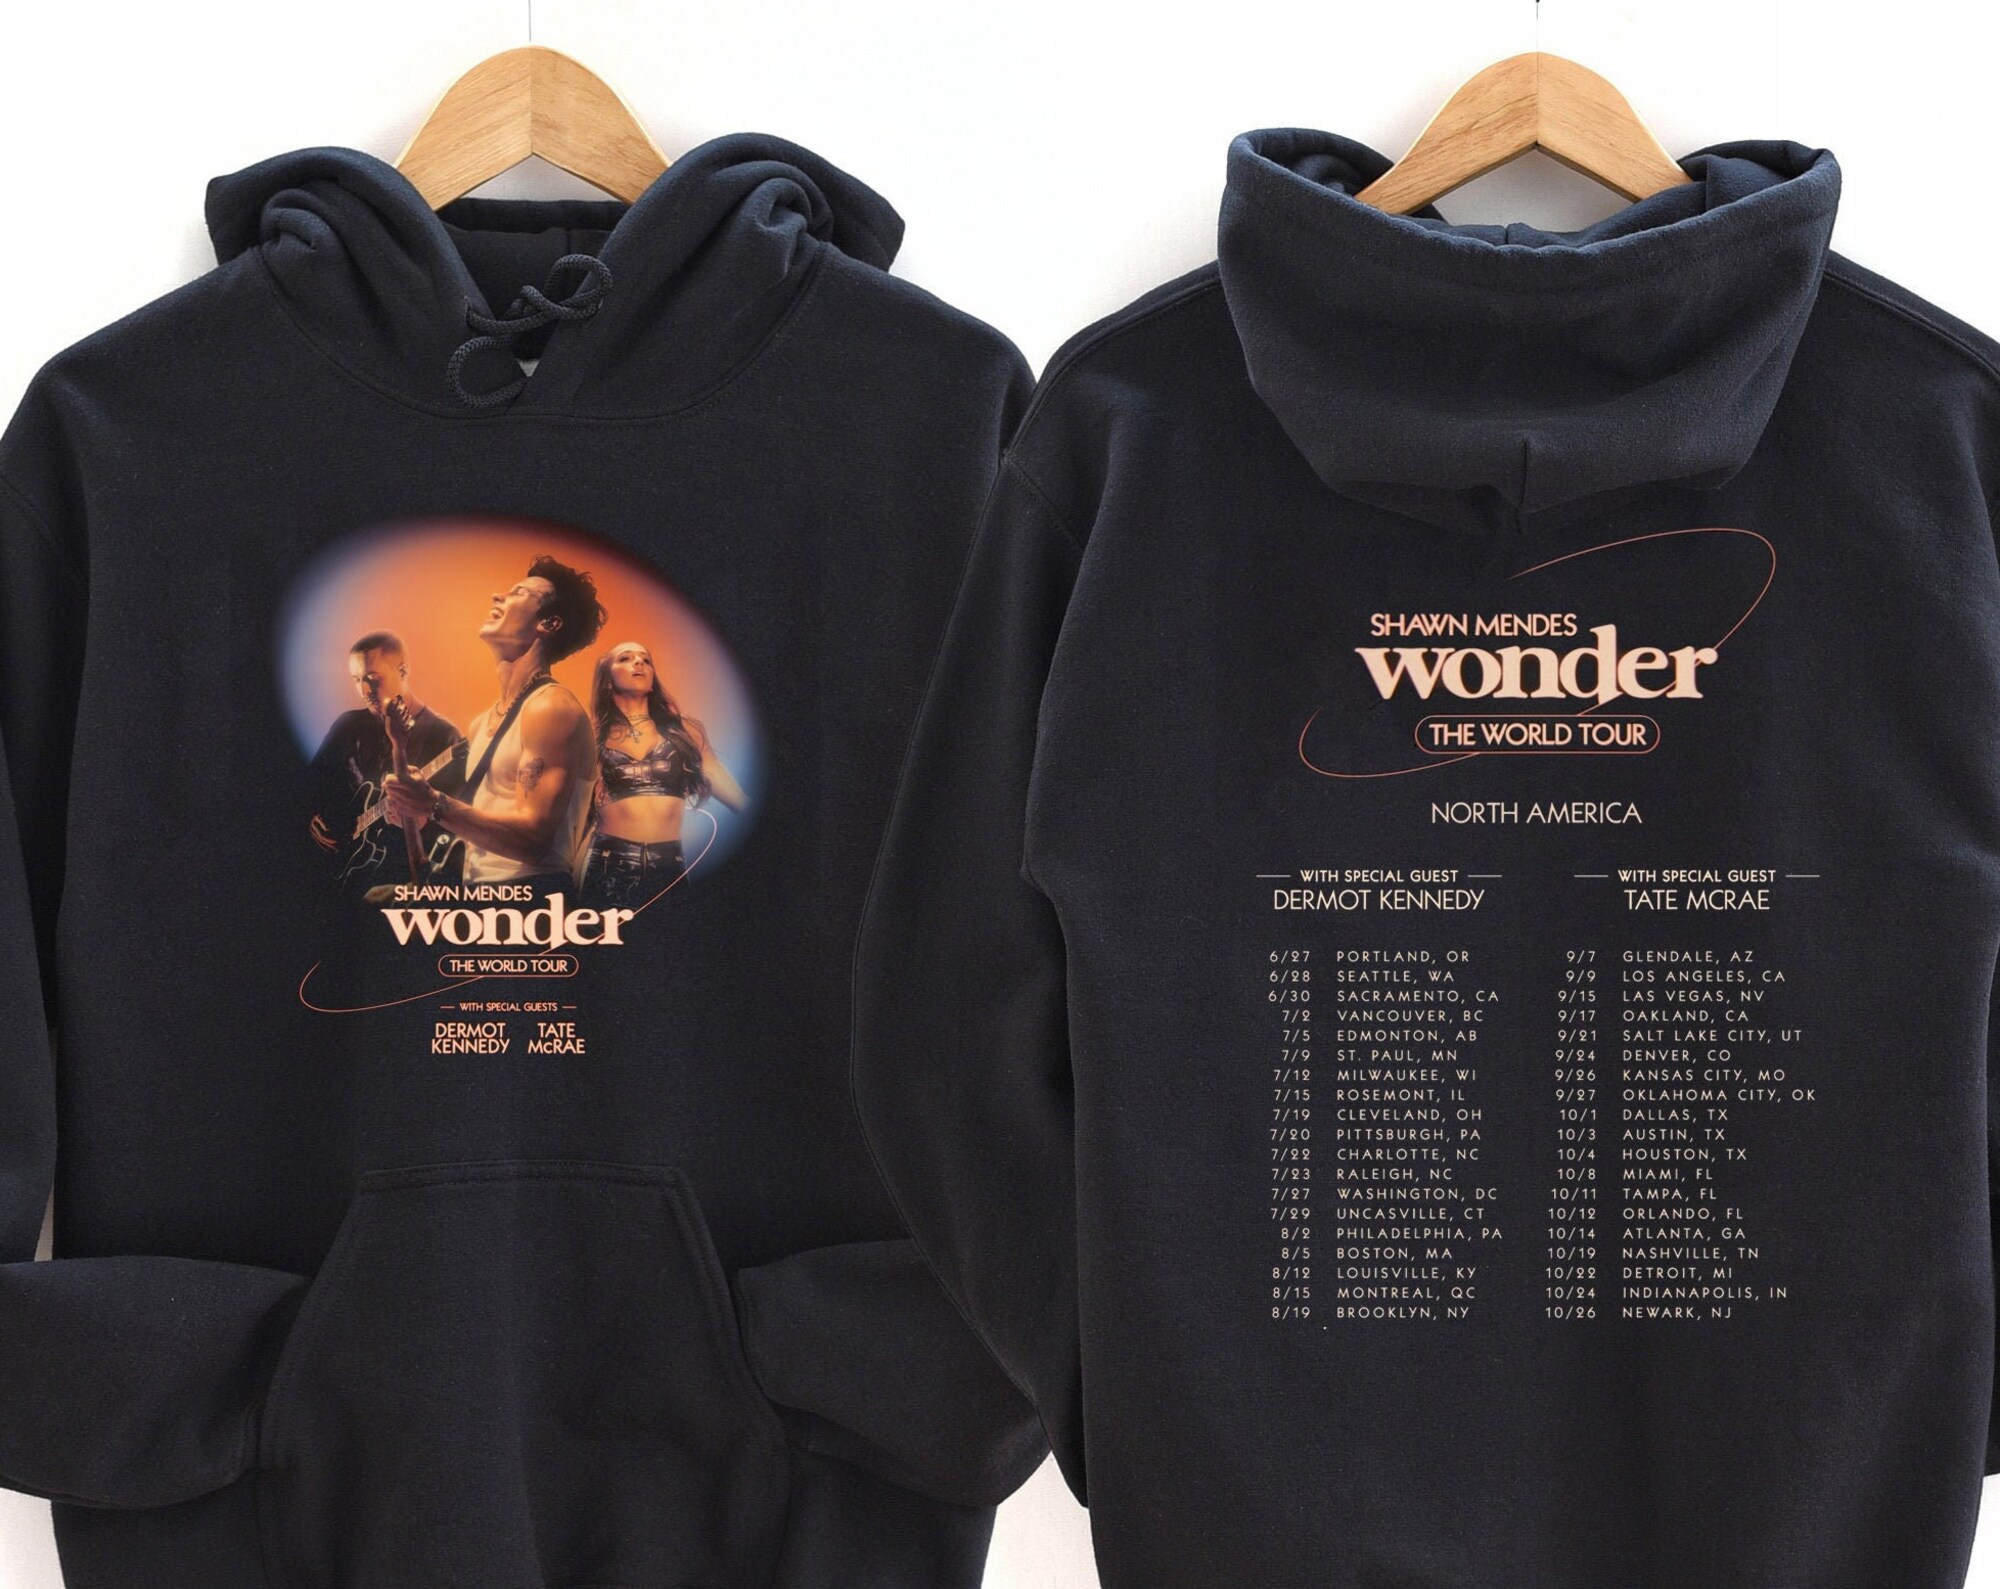 Shawn Mendes Wonder North America Tour 2022 with tour dates hoodie, Shawn Mendes Wonder hoodie